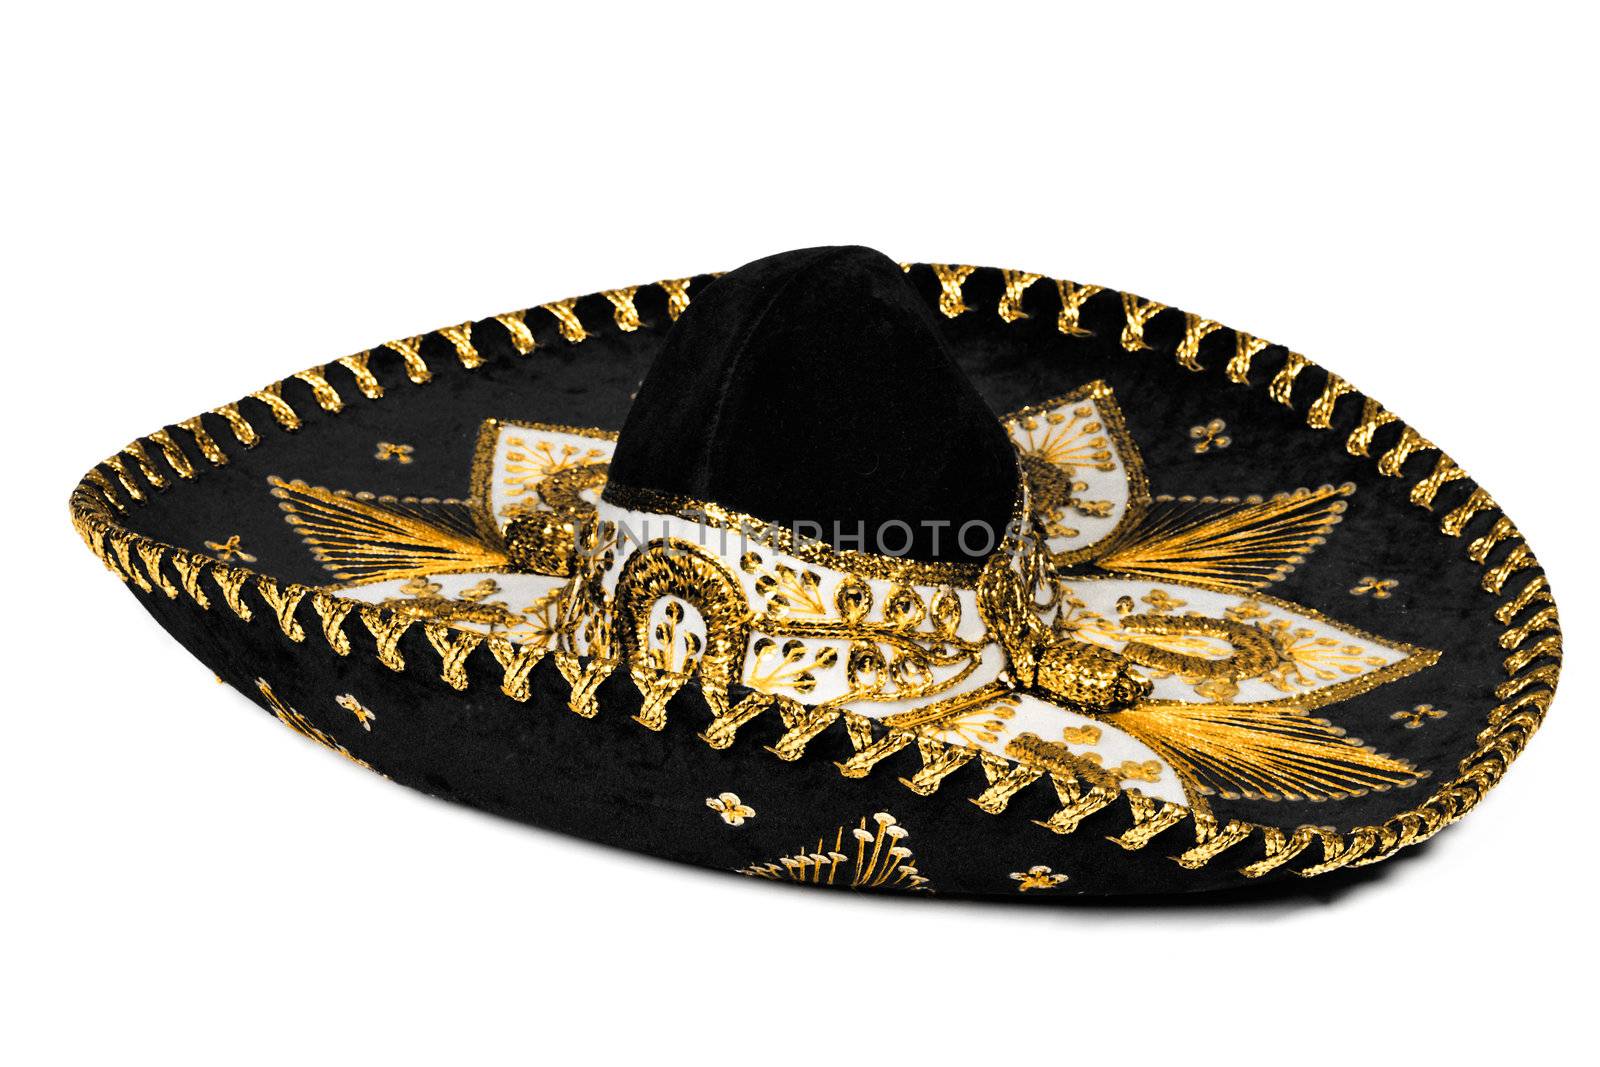 Black mexican sombrero from Mexico isolated on white background